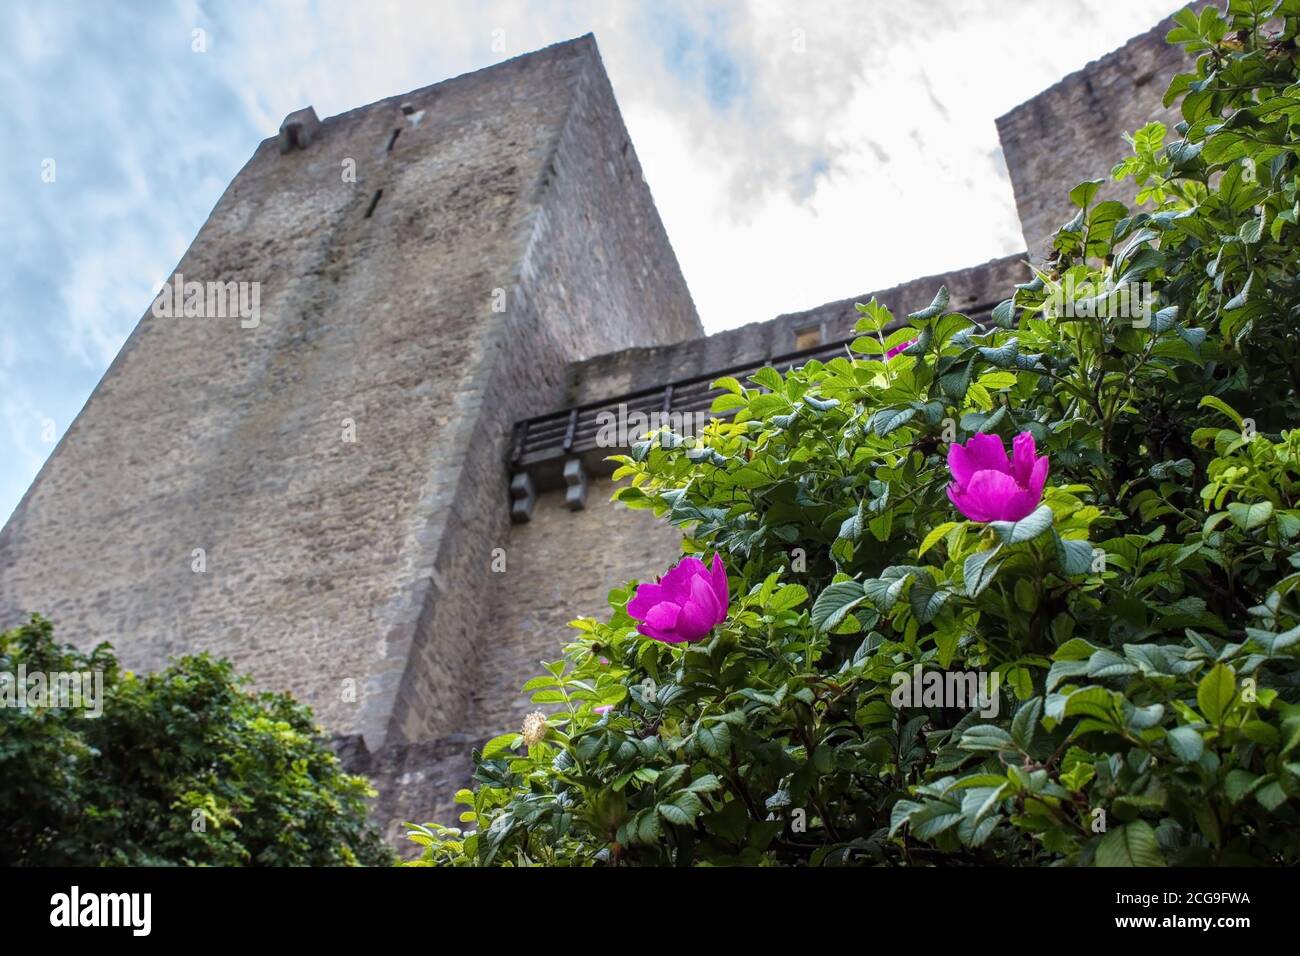 The old historical tower of castle Landstejn in the Czech Republic Stock Photo